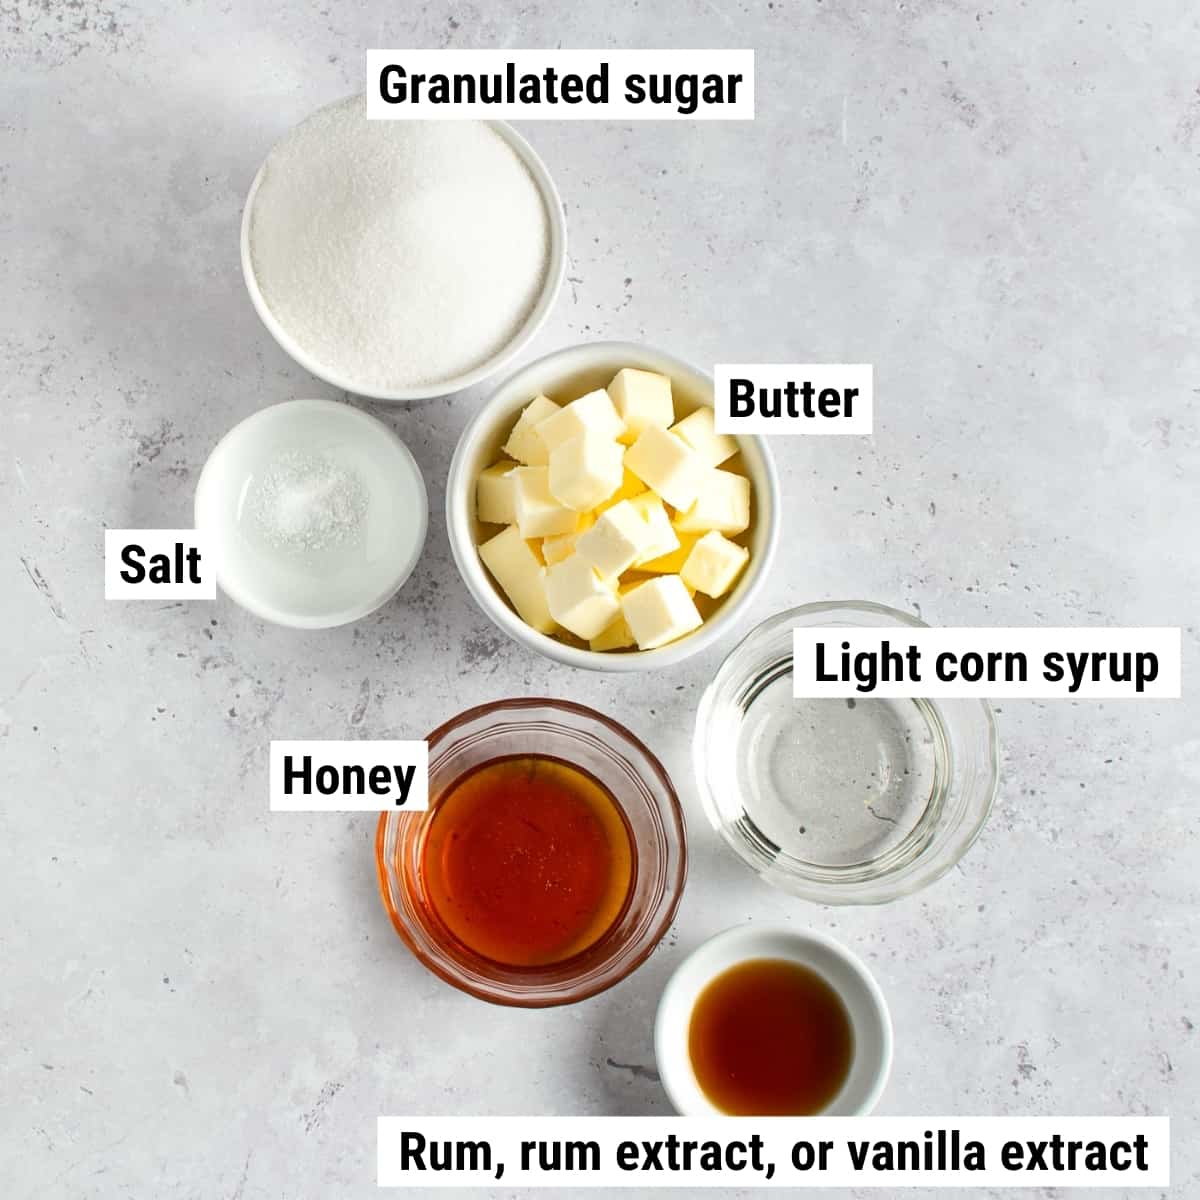 The ingredients used to make butterscotch candies laid out on a table.